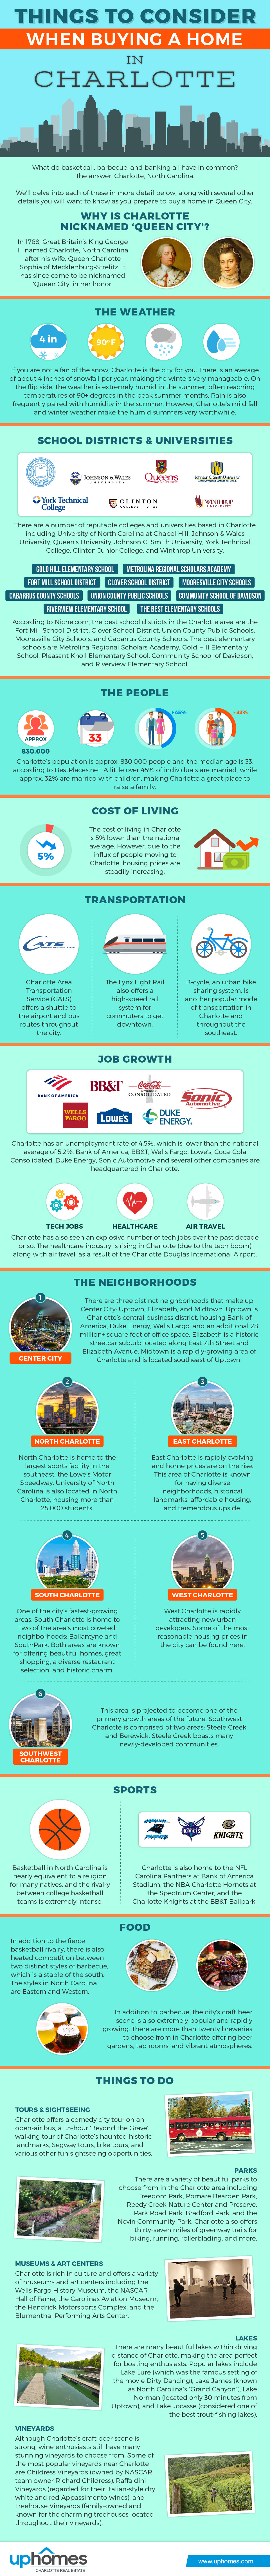 Things to Consider When Buying a Home in Charlotte, NC